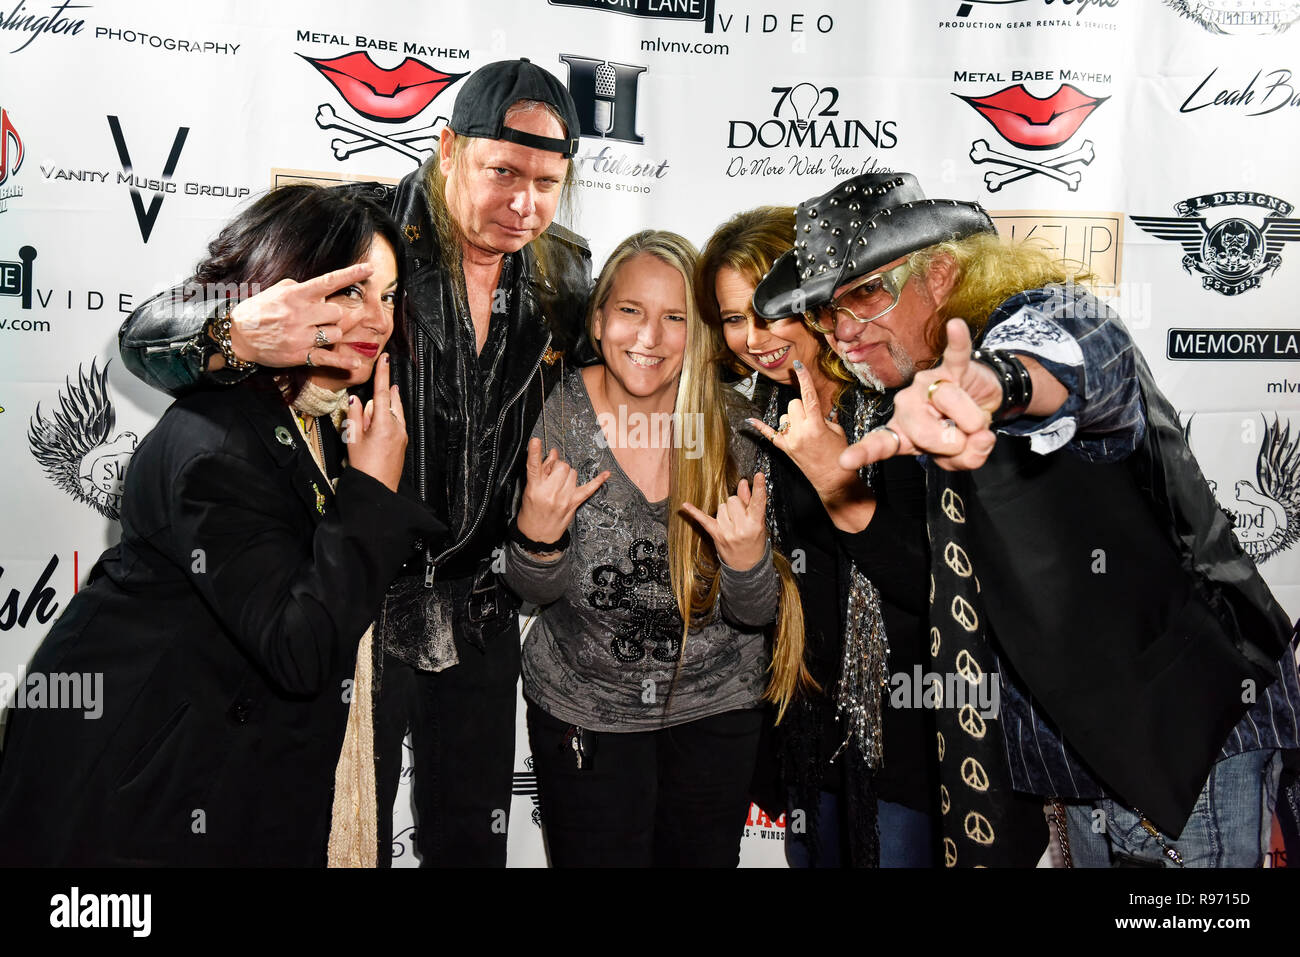 Las Vegas, Nevada, December 19th, Sin City Presents Magazine hosted the Las  Vegas Shredder of the Year Awards at Counts Vamp'd Rock and Roll Bar with  red carpet and music performances by